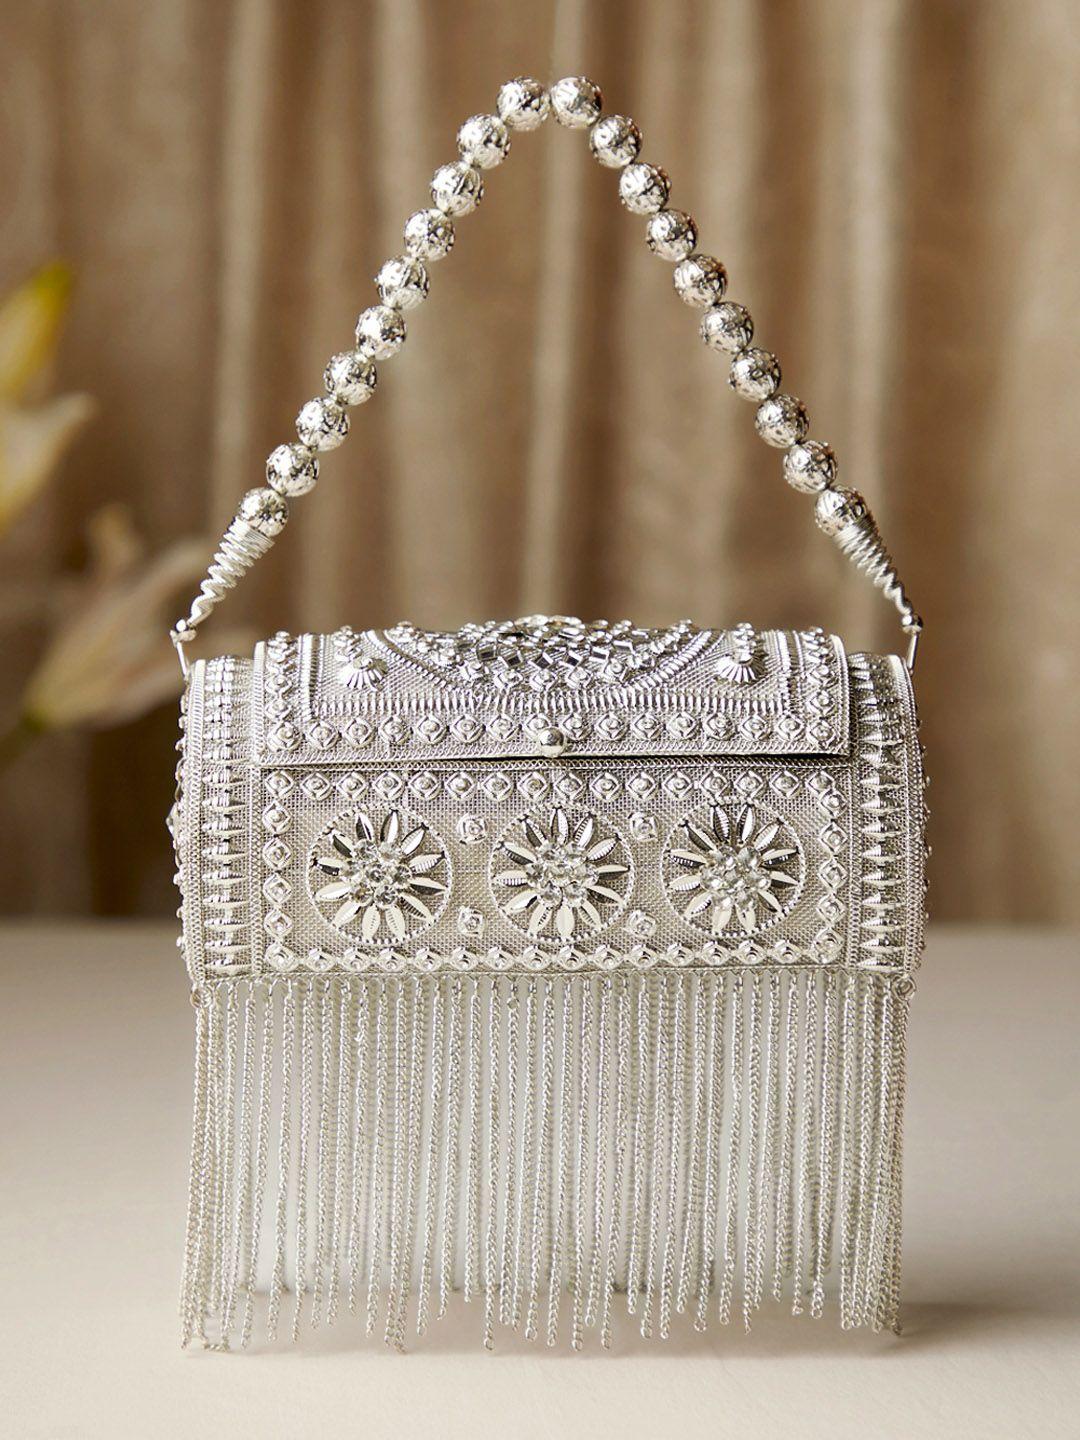 rubans silver-toned embellished embroidered box clutch